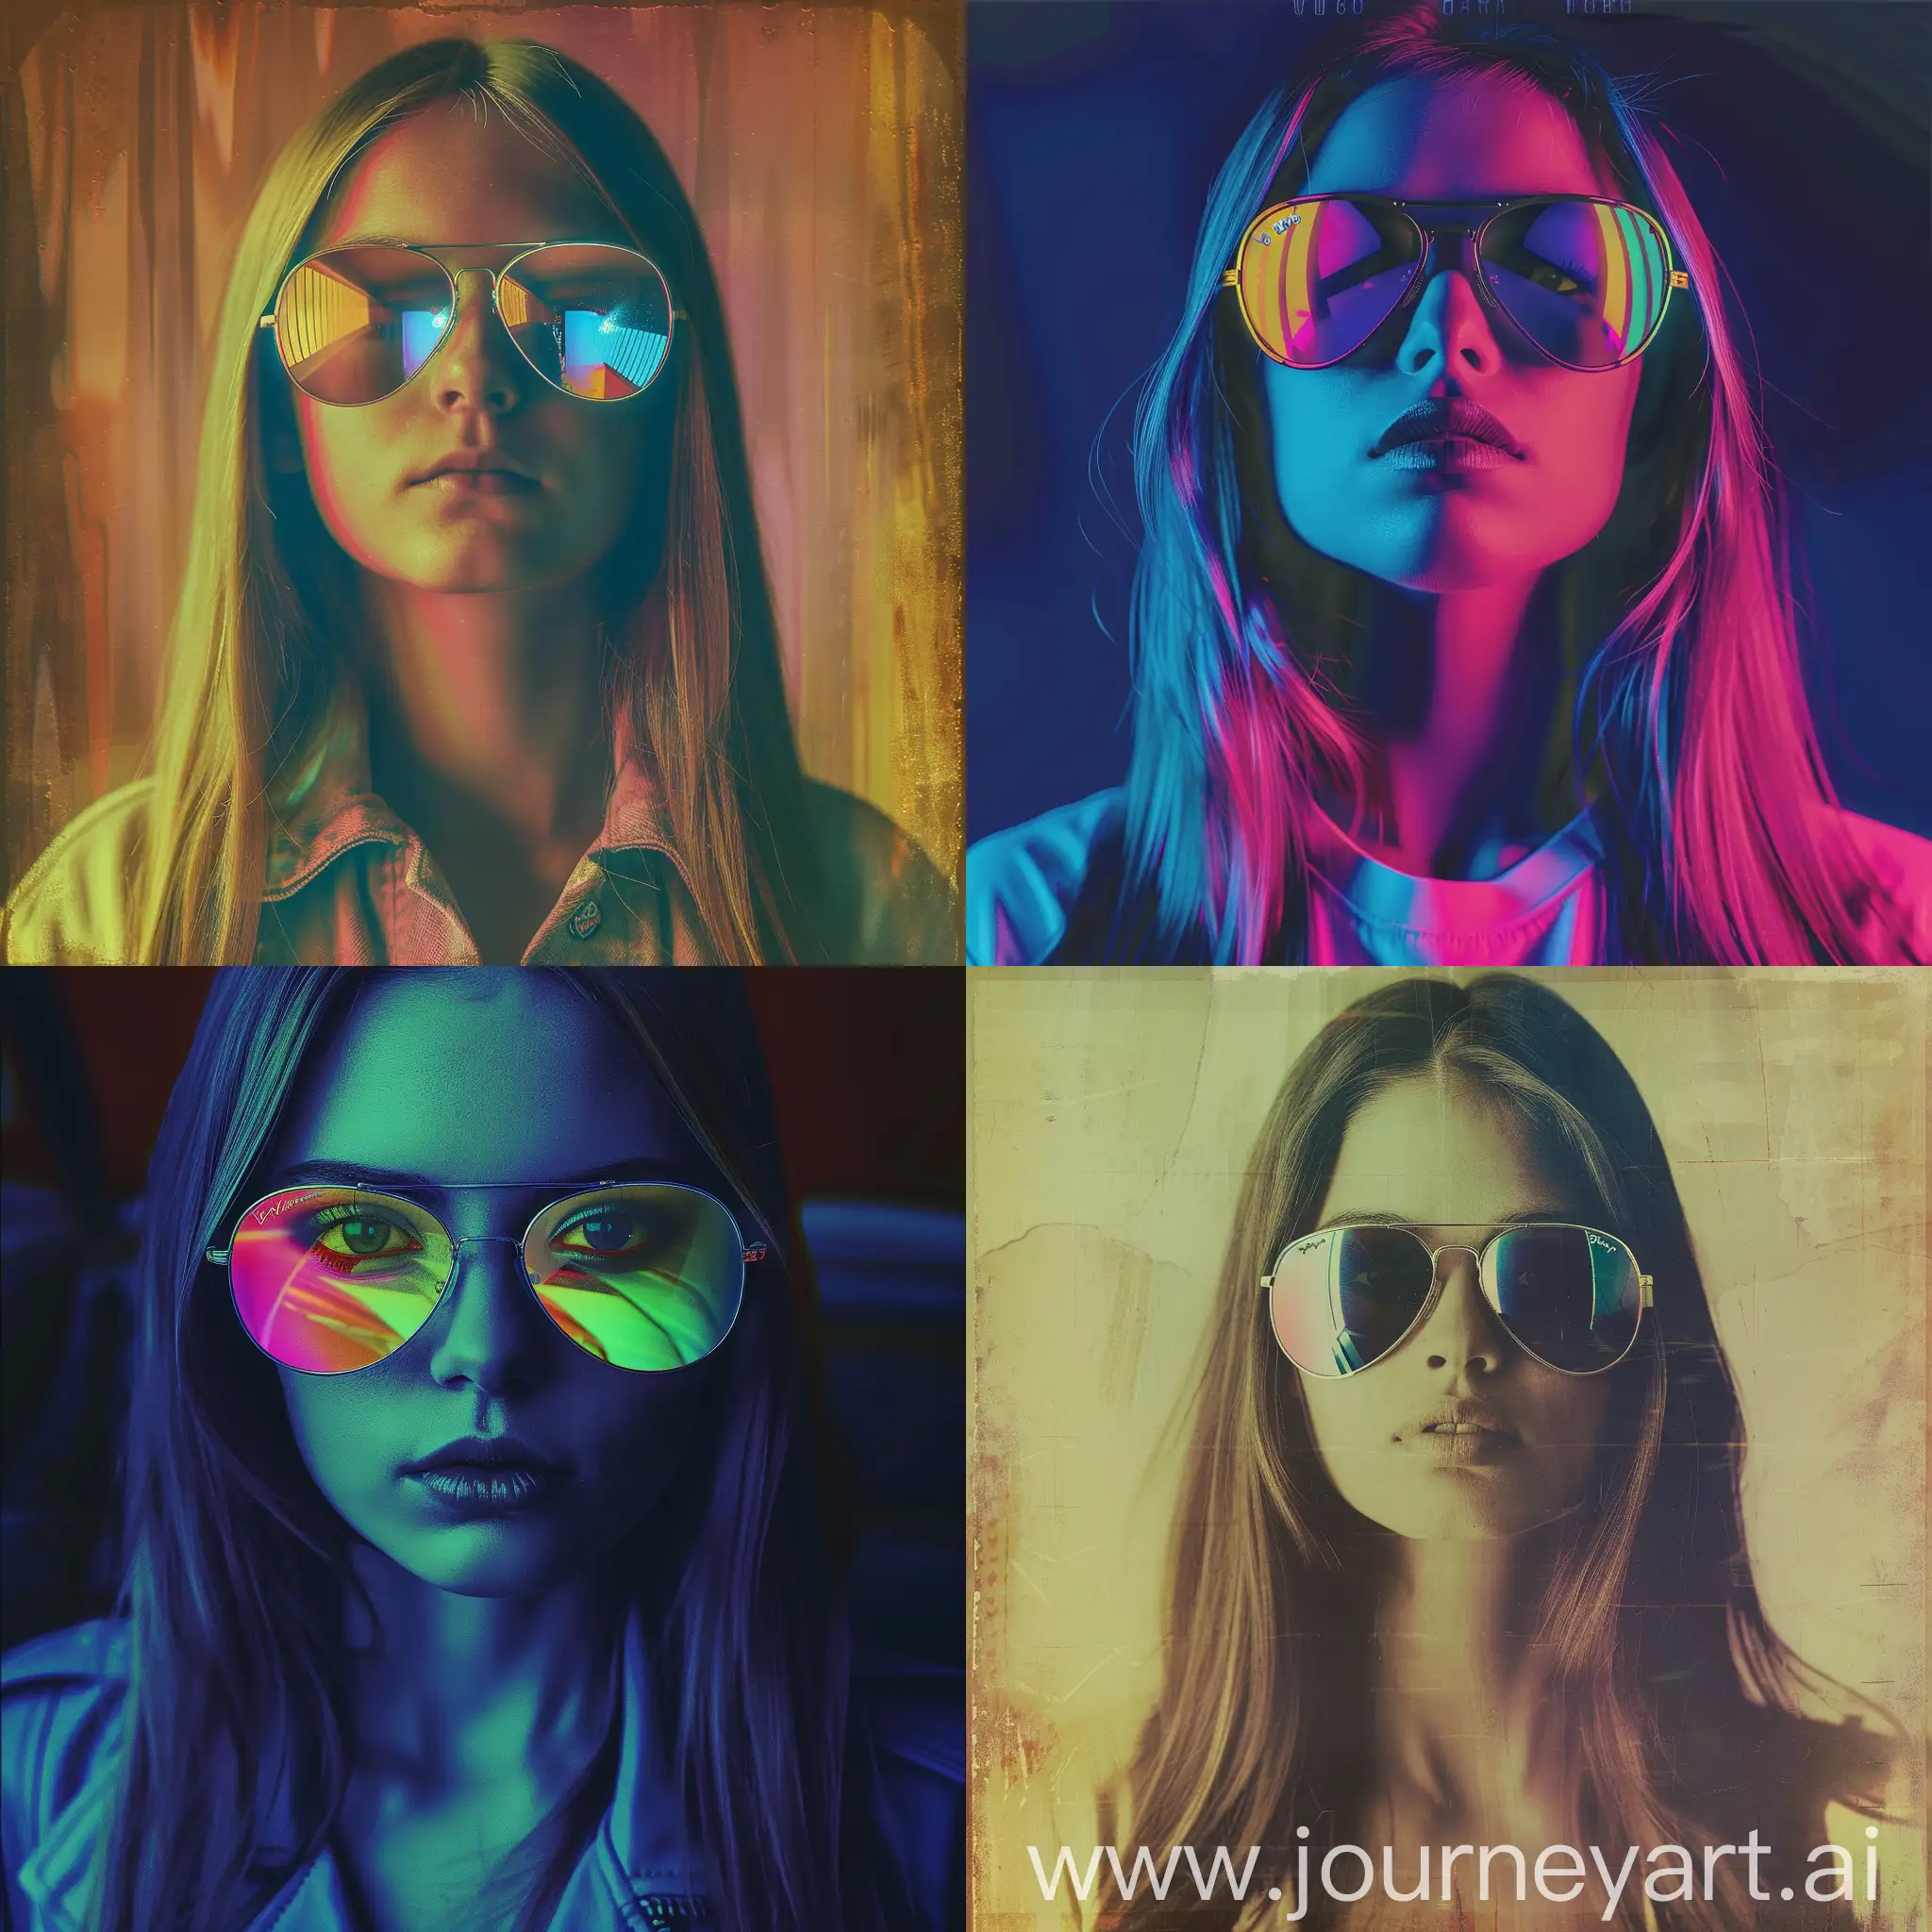 Generate a portrait of a girl wearing ray ban or Vaurnet reflective sunglasses reminiscent of iconic 1980s movie posters. The girl's expression should be confident and stylish, evoking the spirit of the era. Pay attention to the composition, lighting, and color palette to capture the essence of classic 1980s cinematography. Emphasize the bold and vibrant aesthetic typical of the era's movie posters, while also ensuring a timeless and iconic quality to the image.  Hair should be long and straight.  Use a Kodak vintage film photo look.